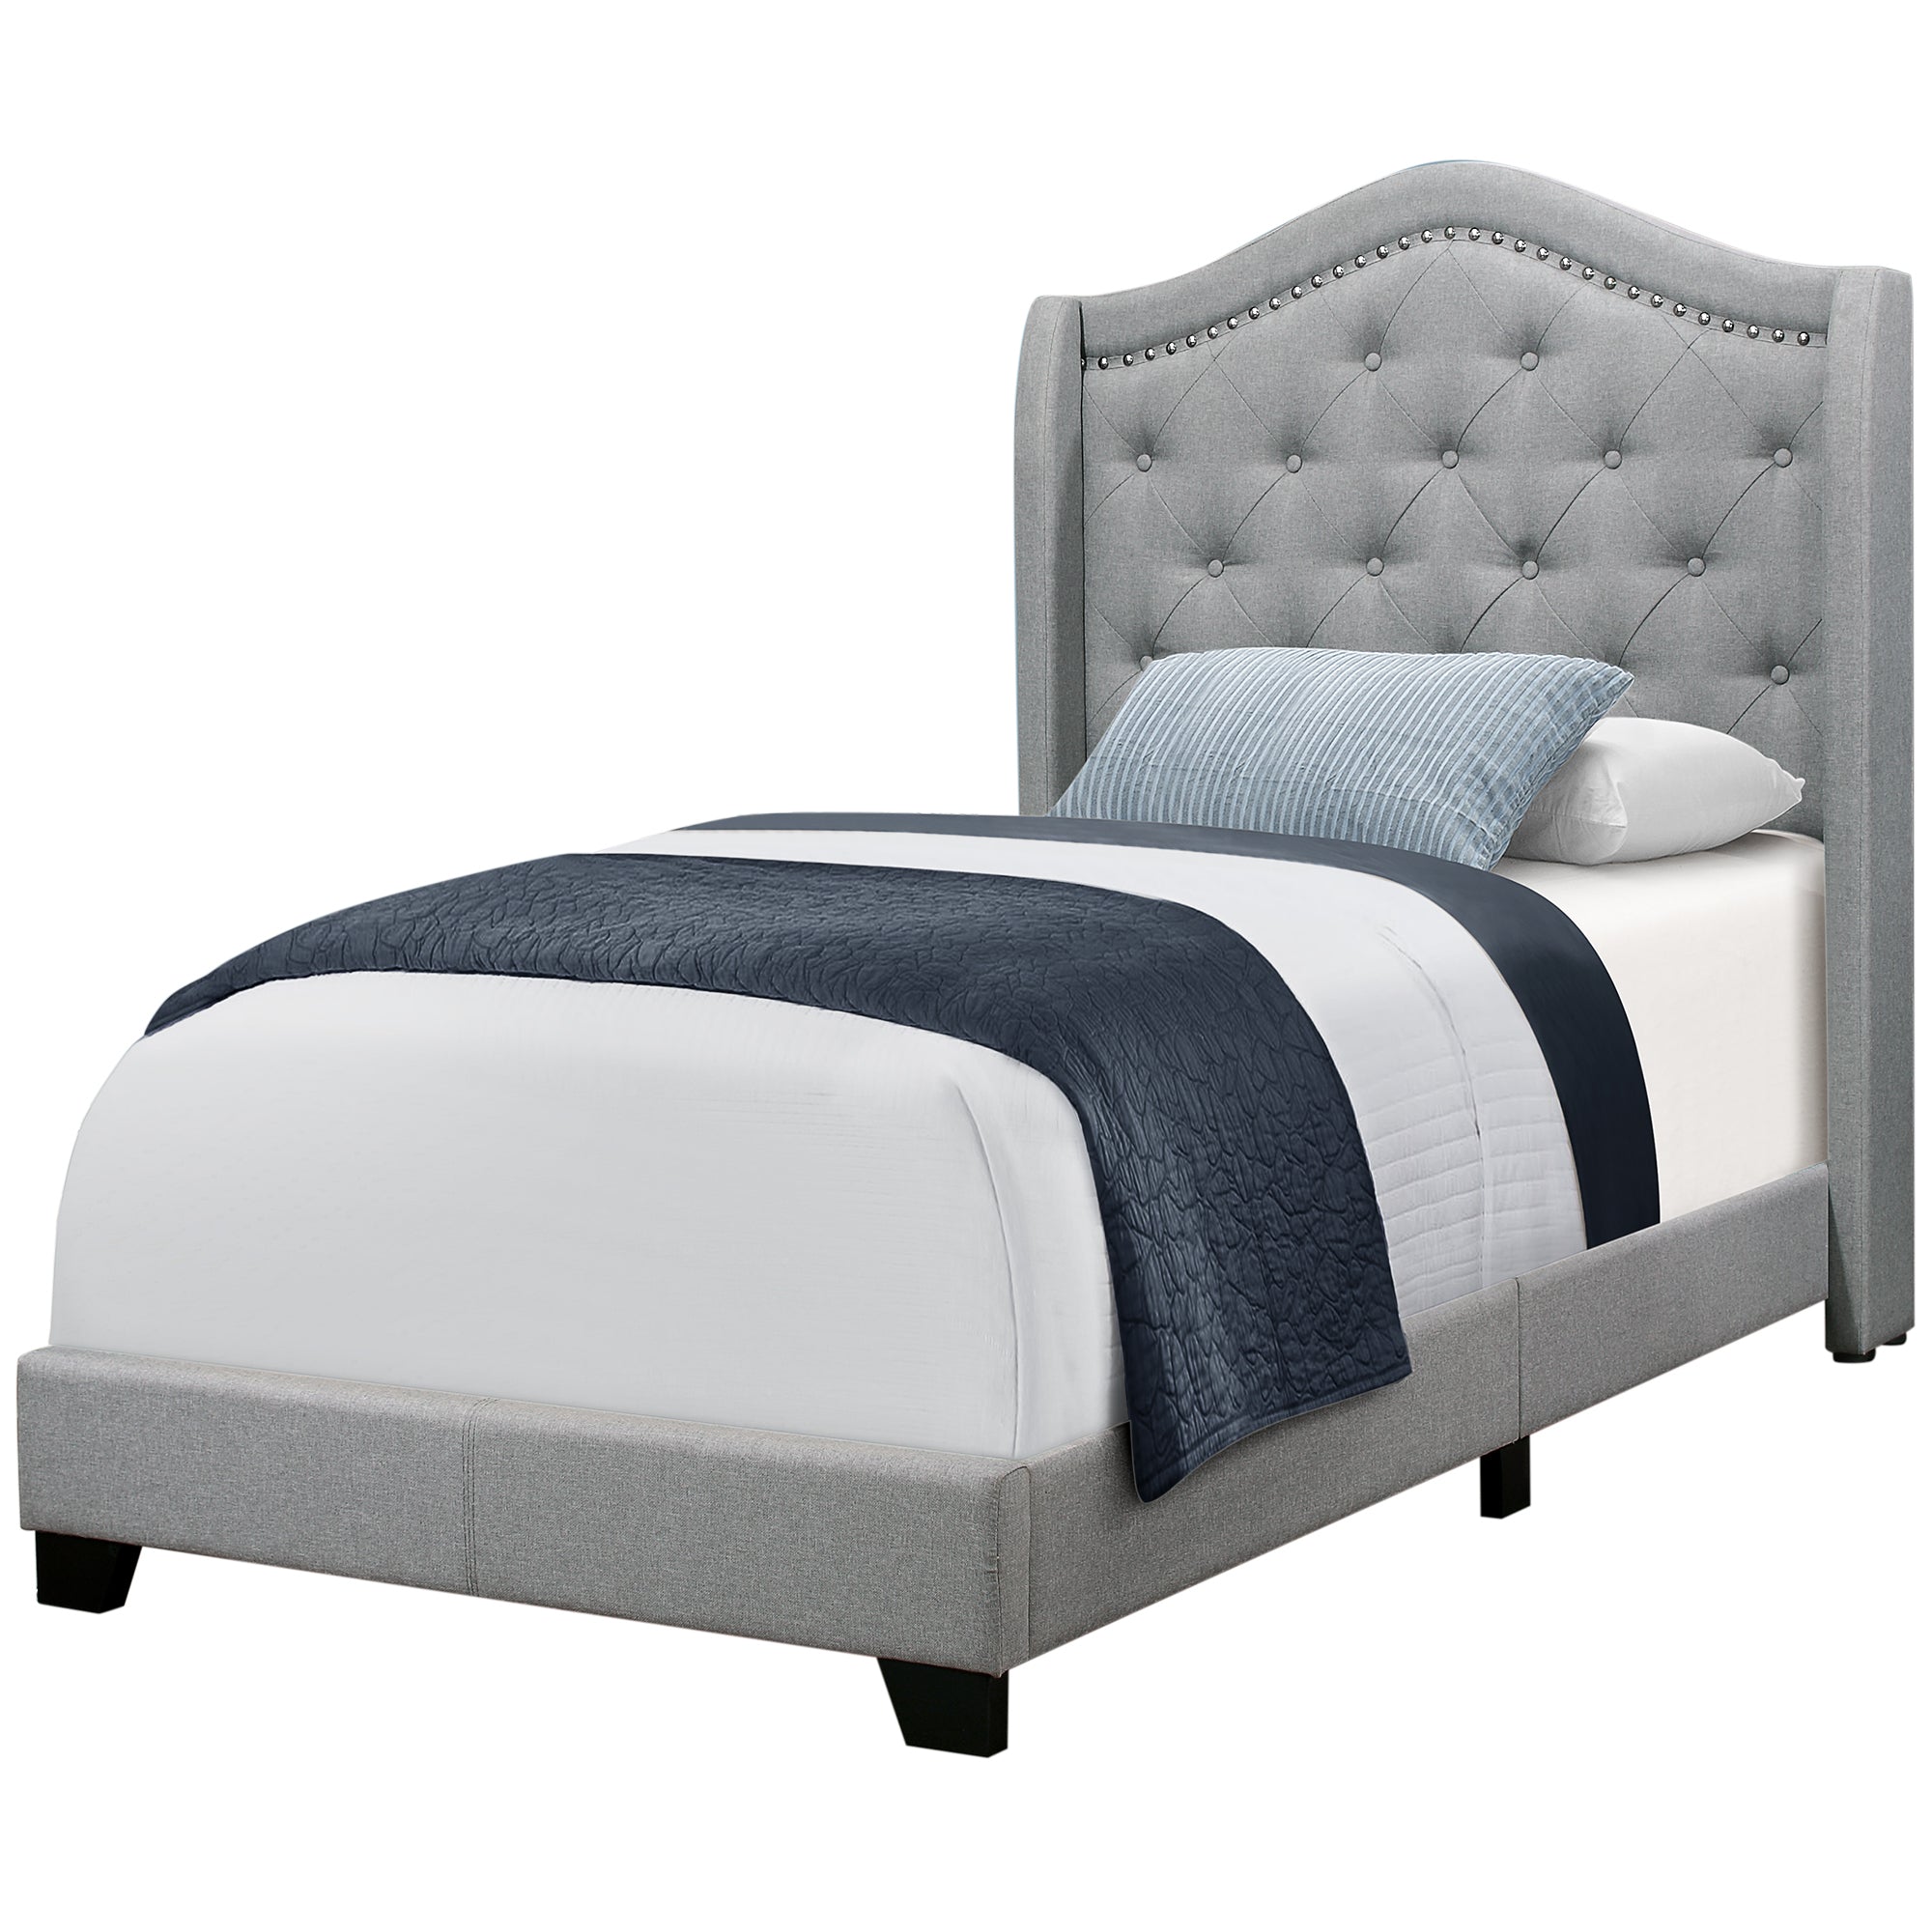 Bed - Twin Size / Grey Linen With Chrome Trim